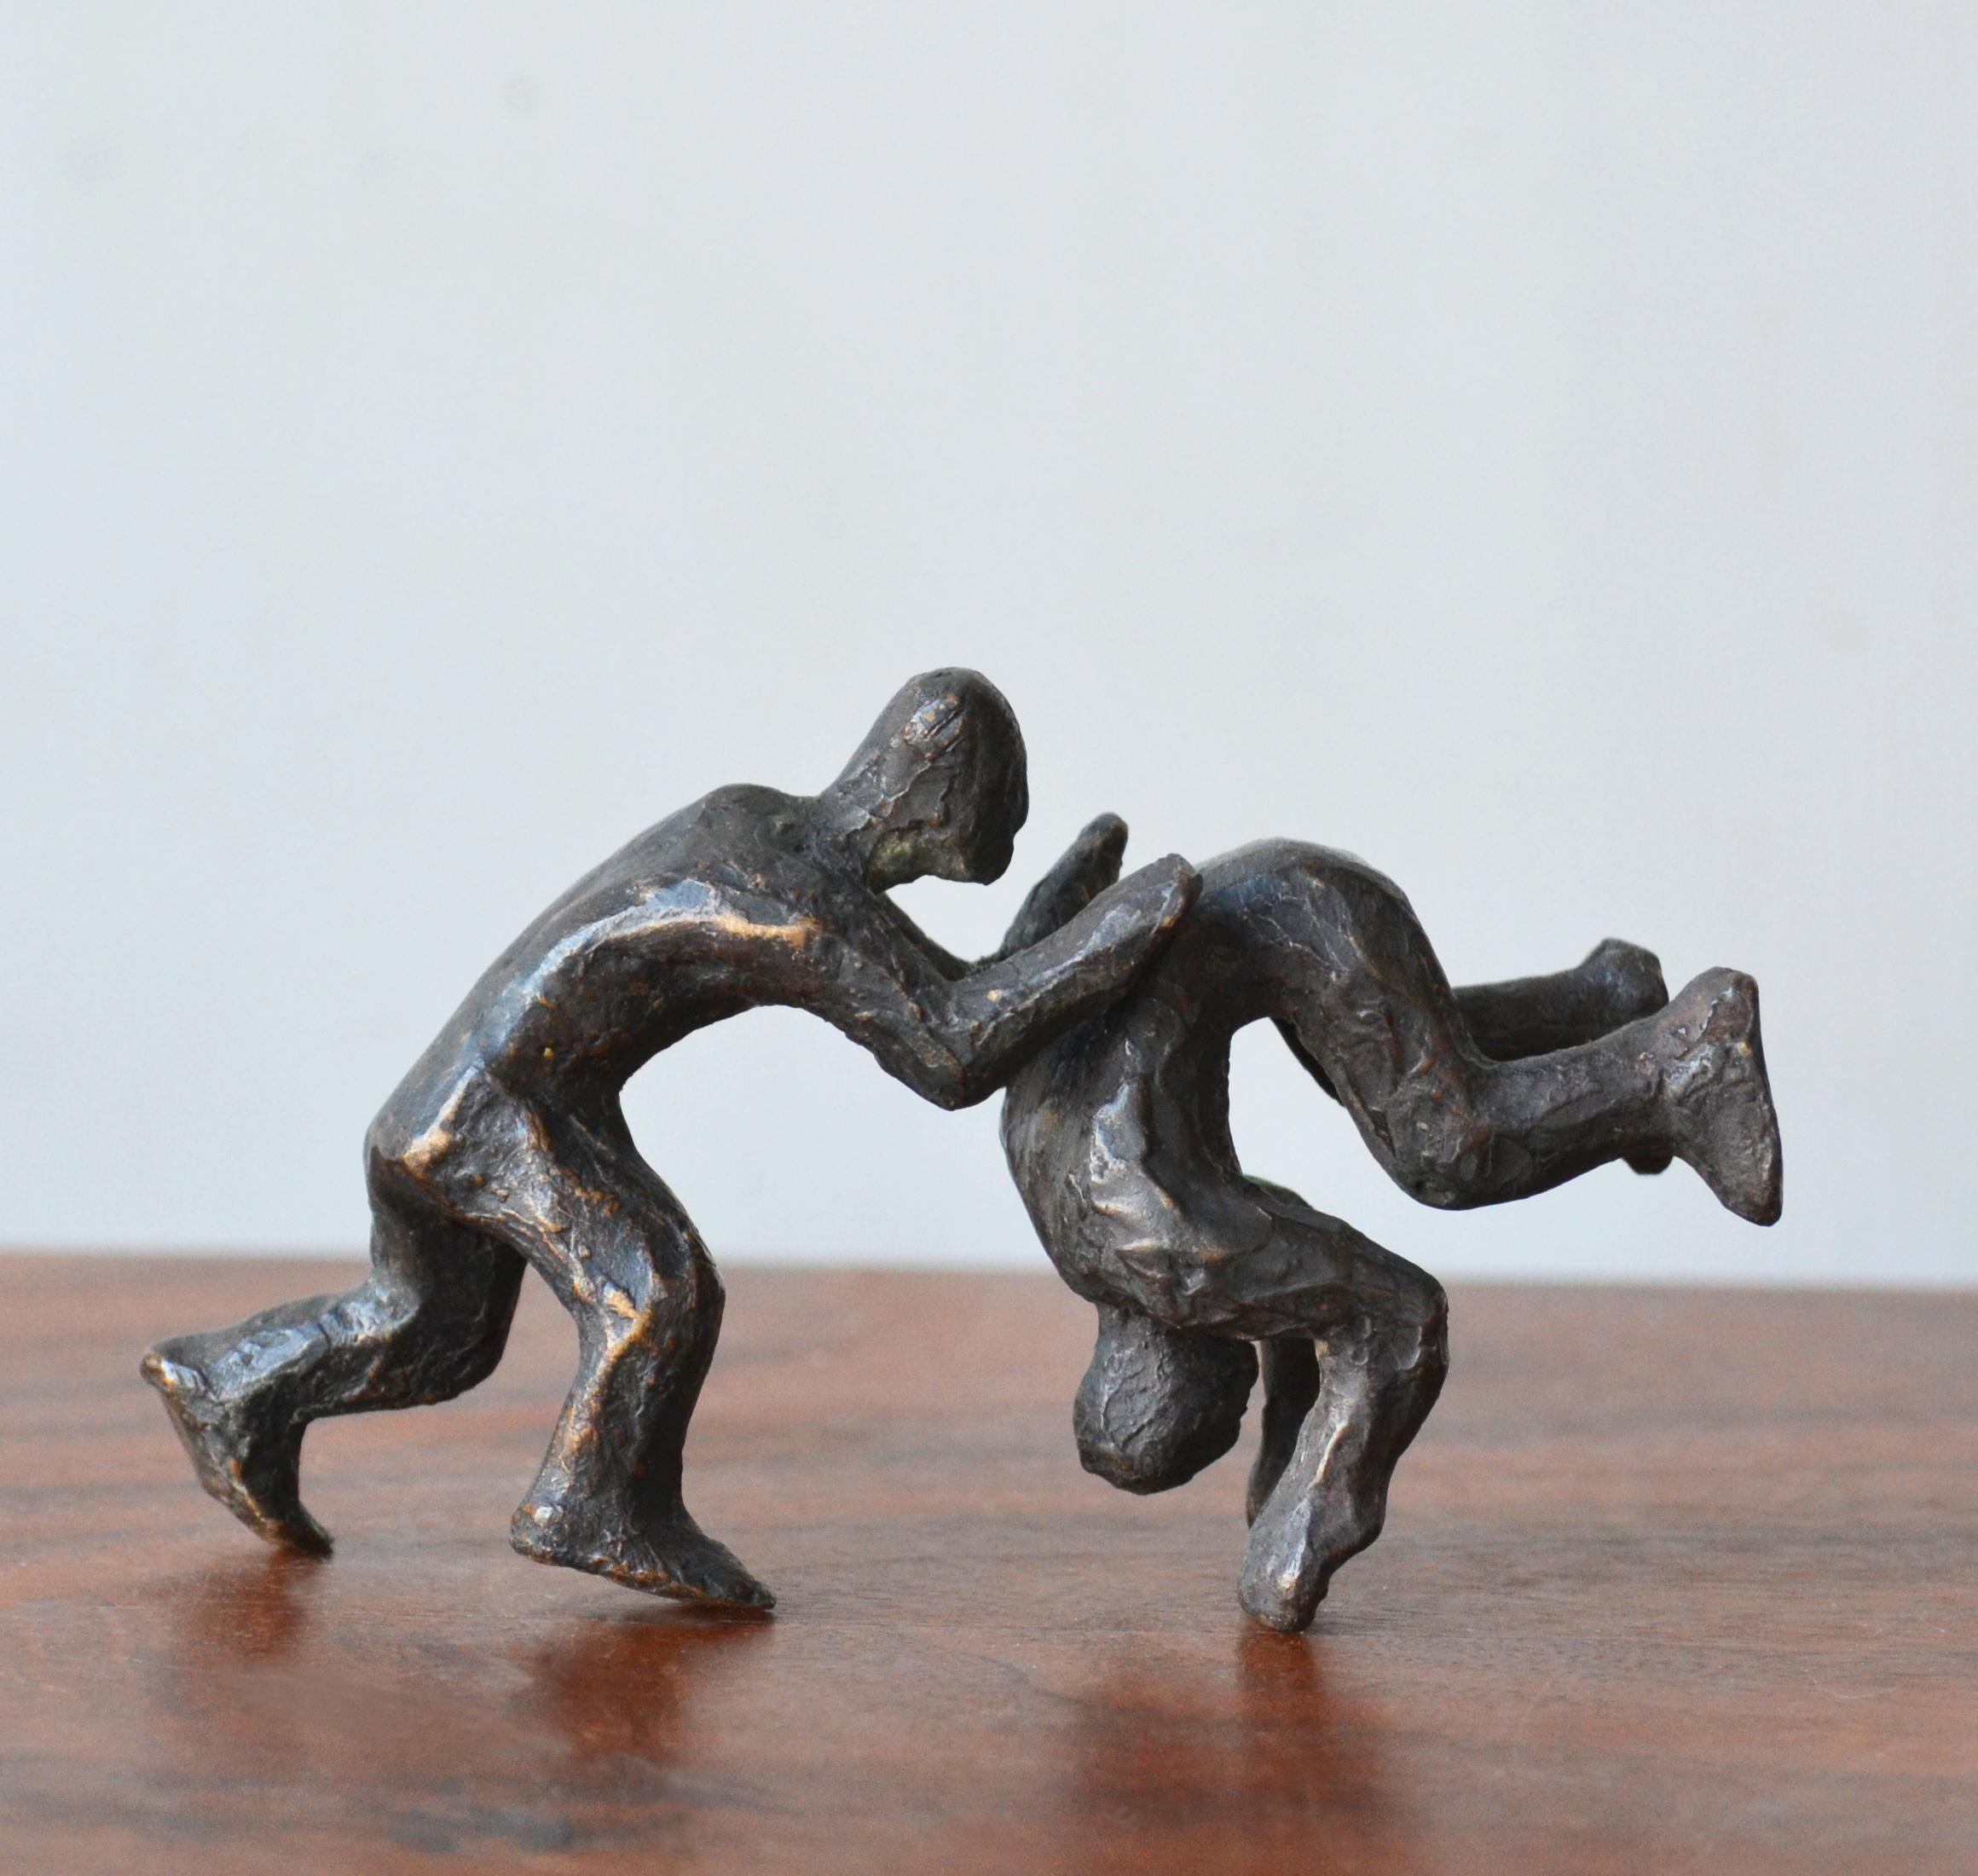 Why Fight When You Can Play? -playful interactive bronze figures sold in pairs - Gold Figurative Sculpture by Noa Bornstein